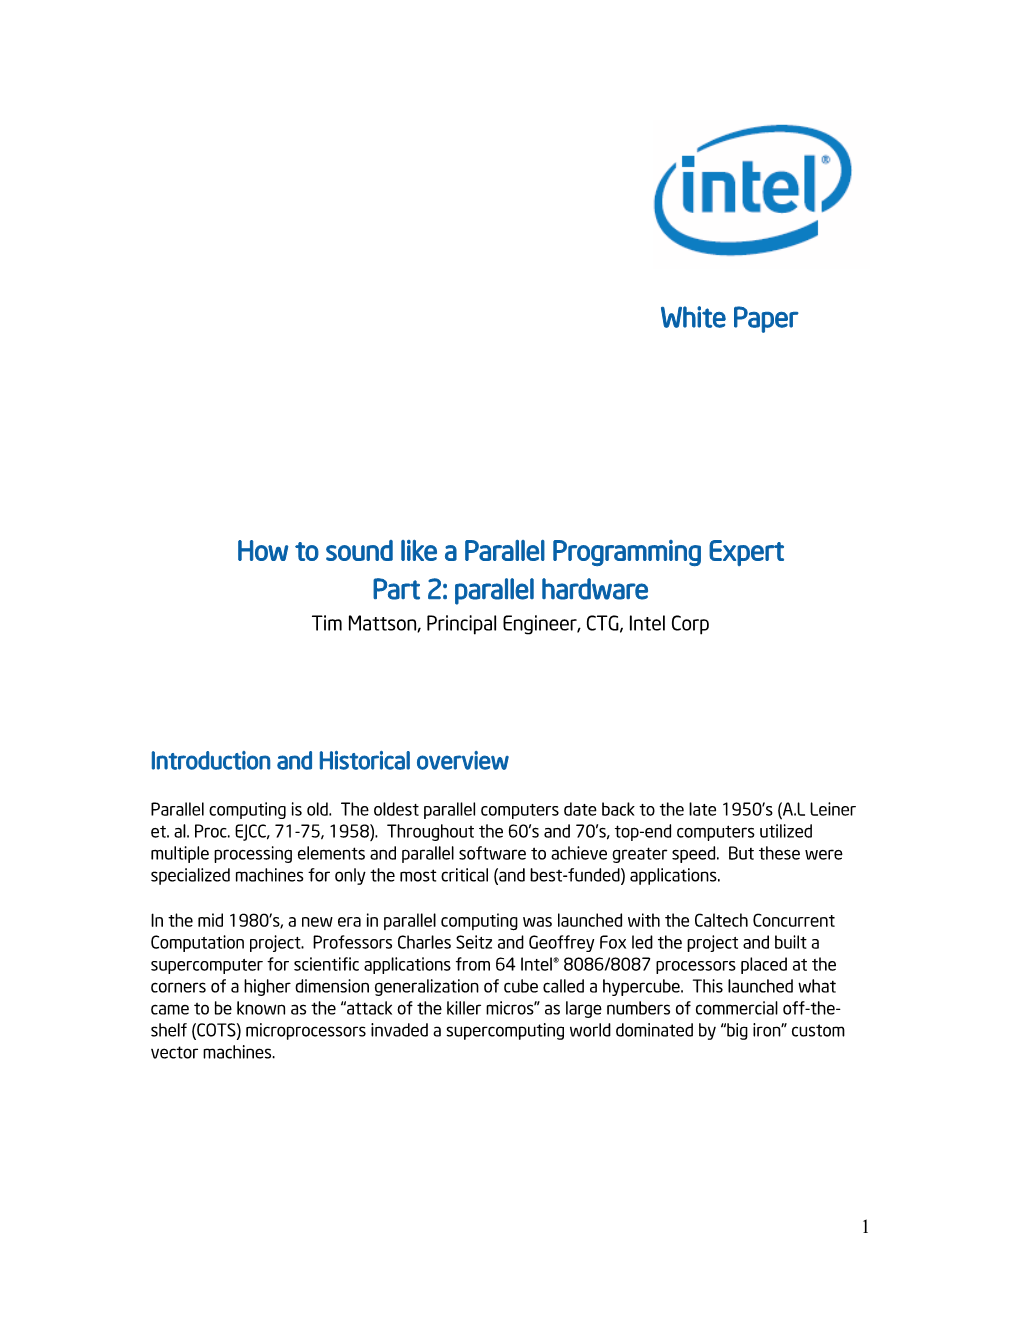 White Paper How to Sound Like a Parallel Programming Expert Part 2